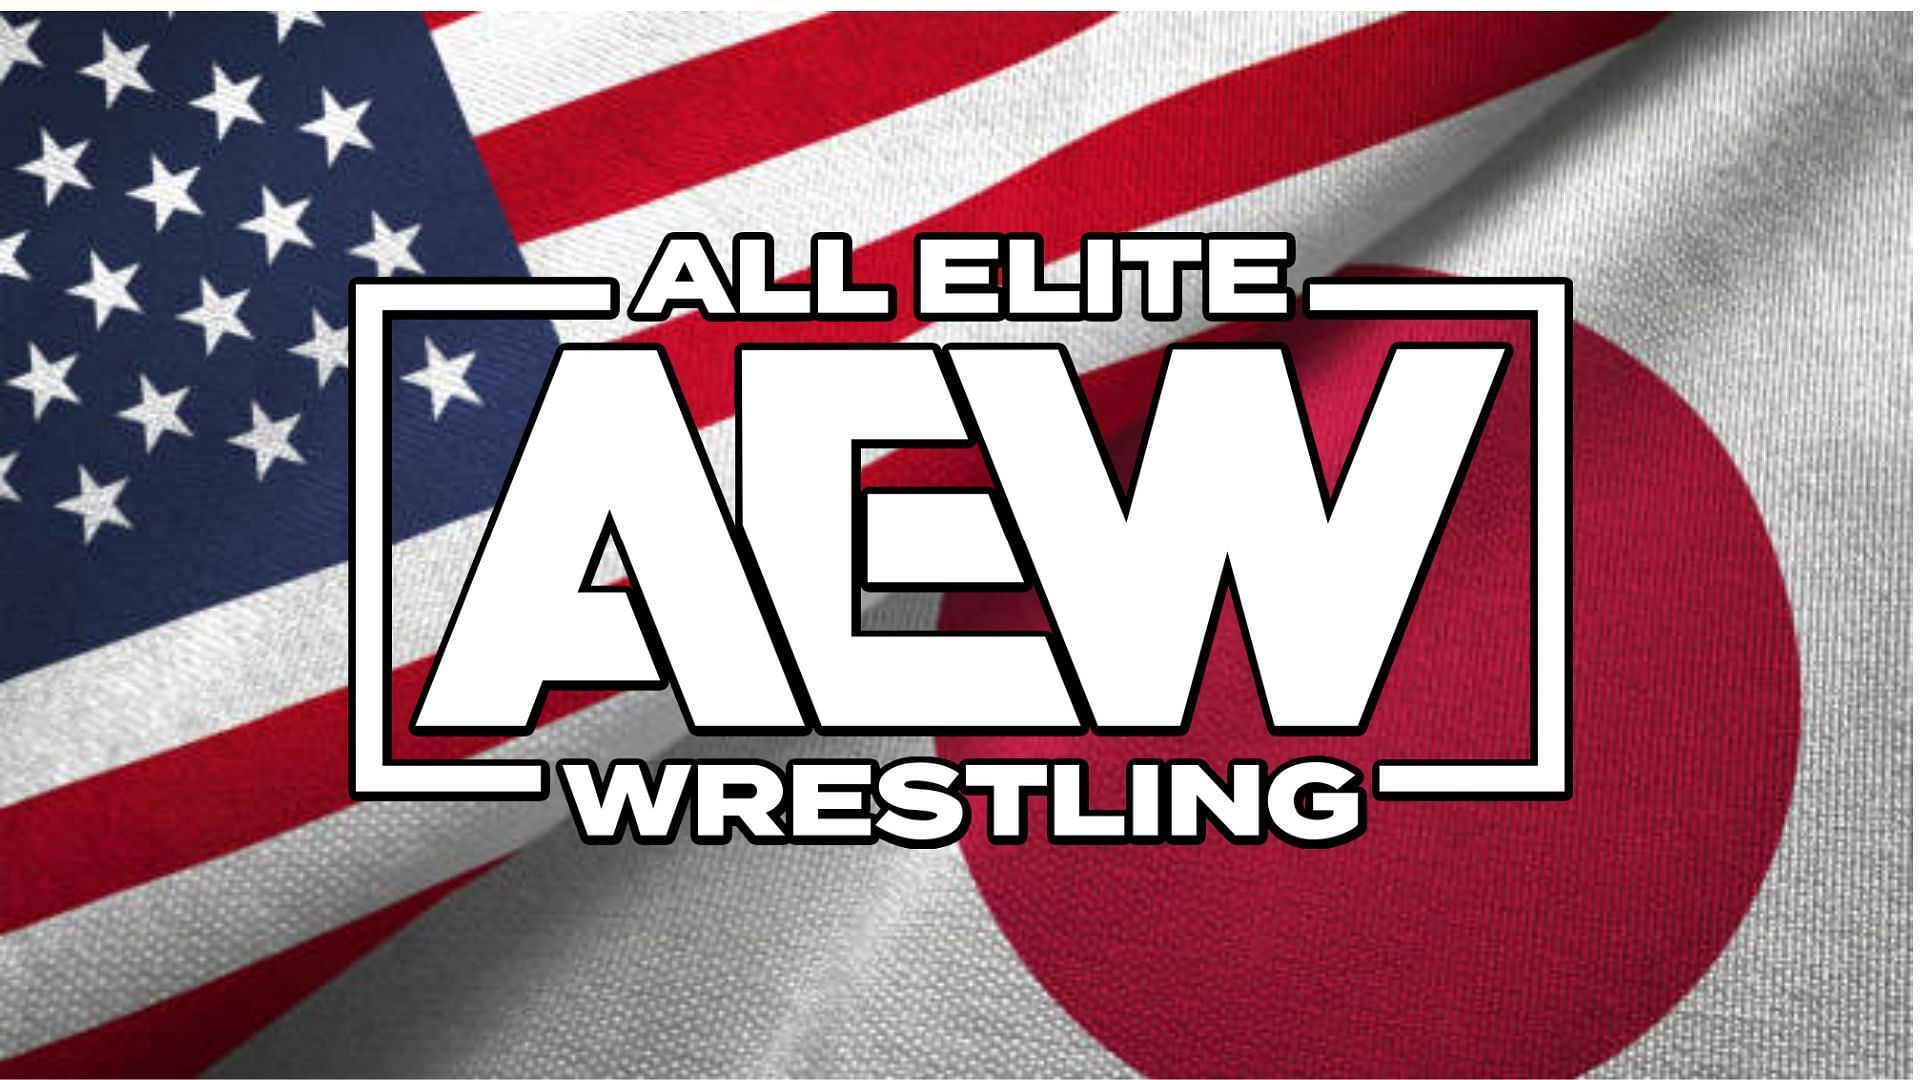 Could the Japanese style of wrestling end up taking over USA?